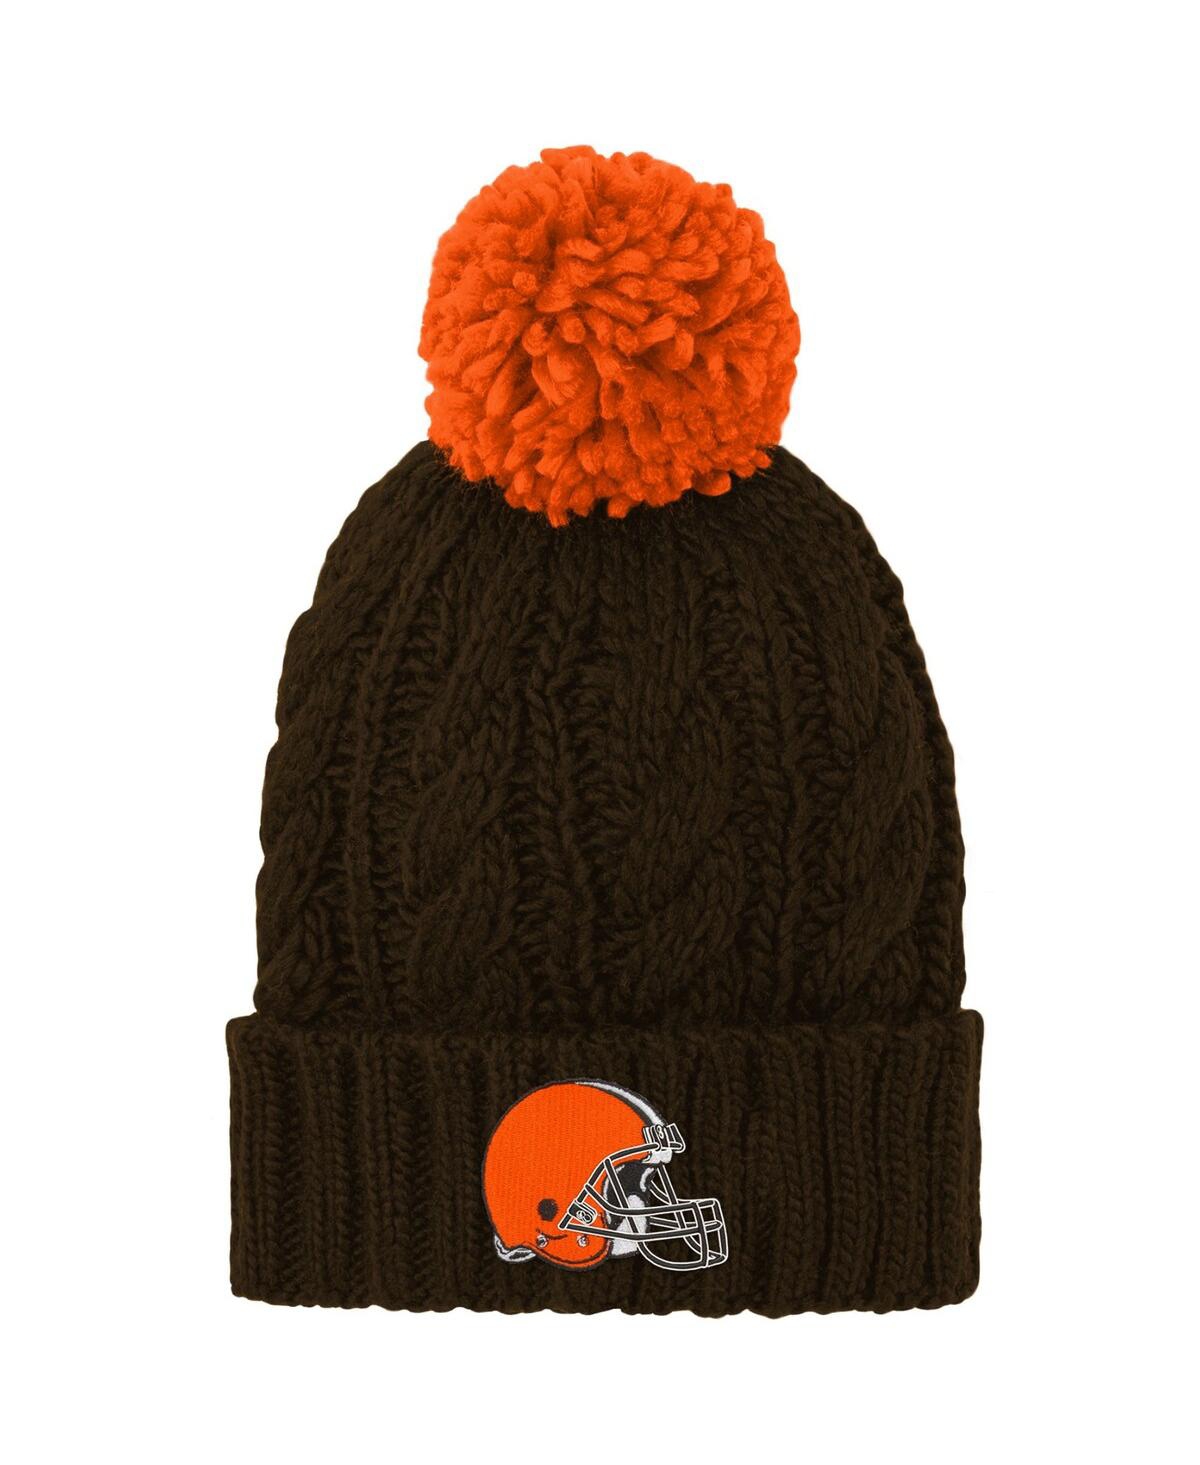 Outerstuff Kids' Big Girls Brown Cleveland Browns Team Cable Cuffed Knit Hat With Pom